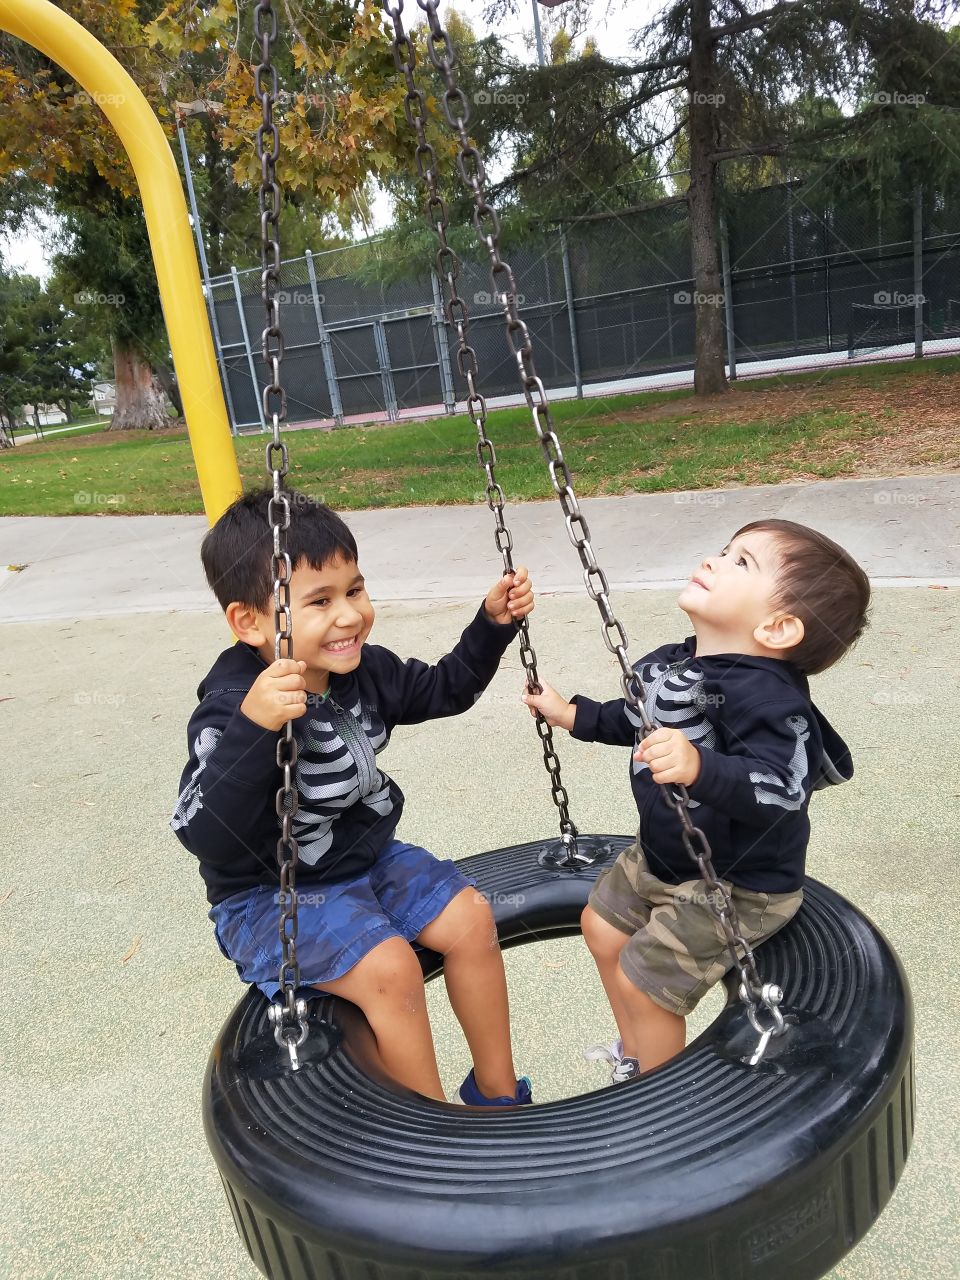 Brothers playing on tire swing